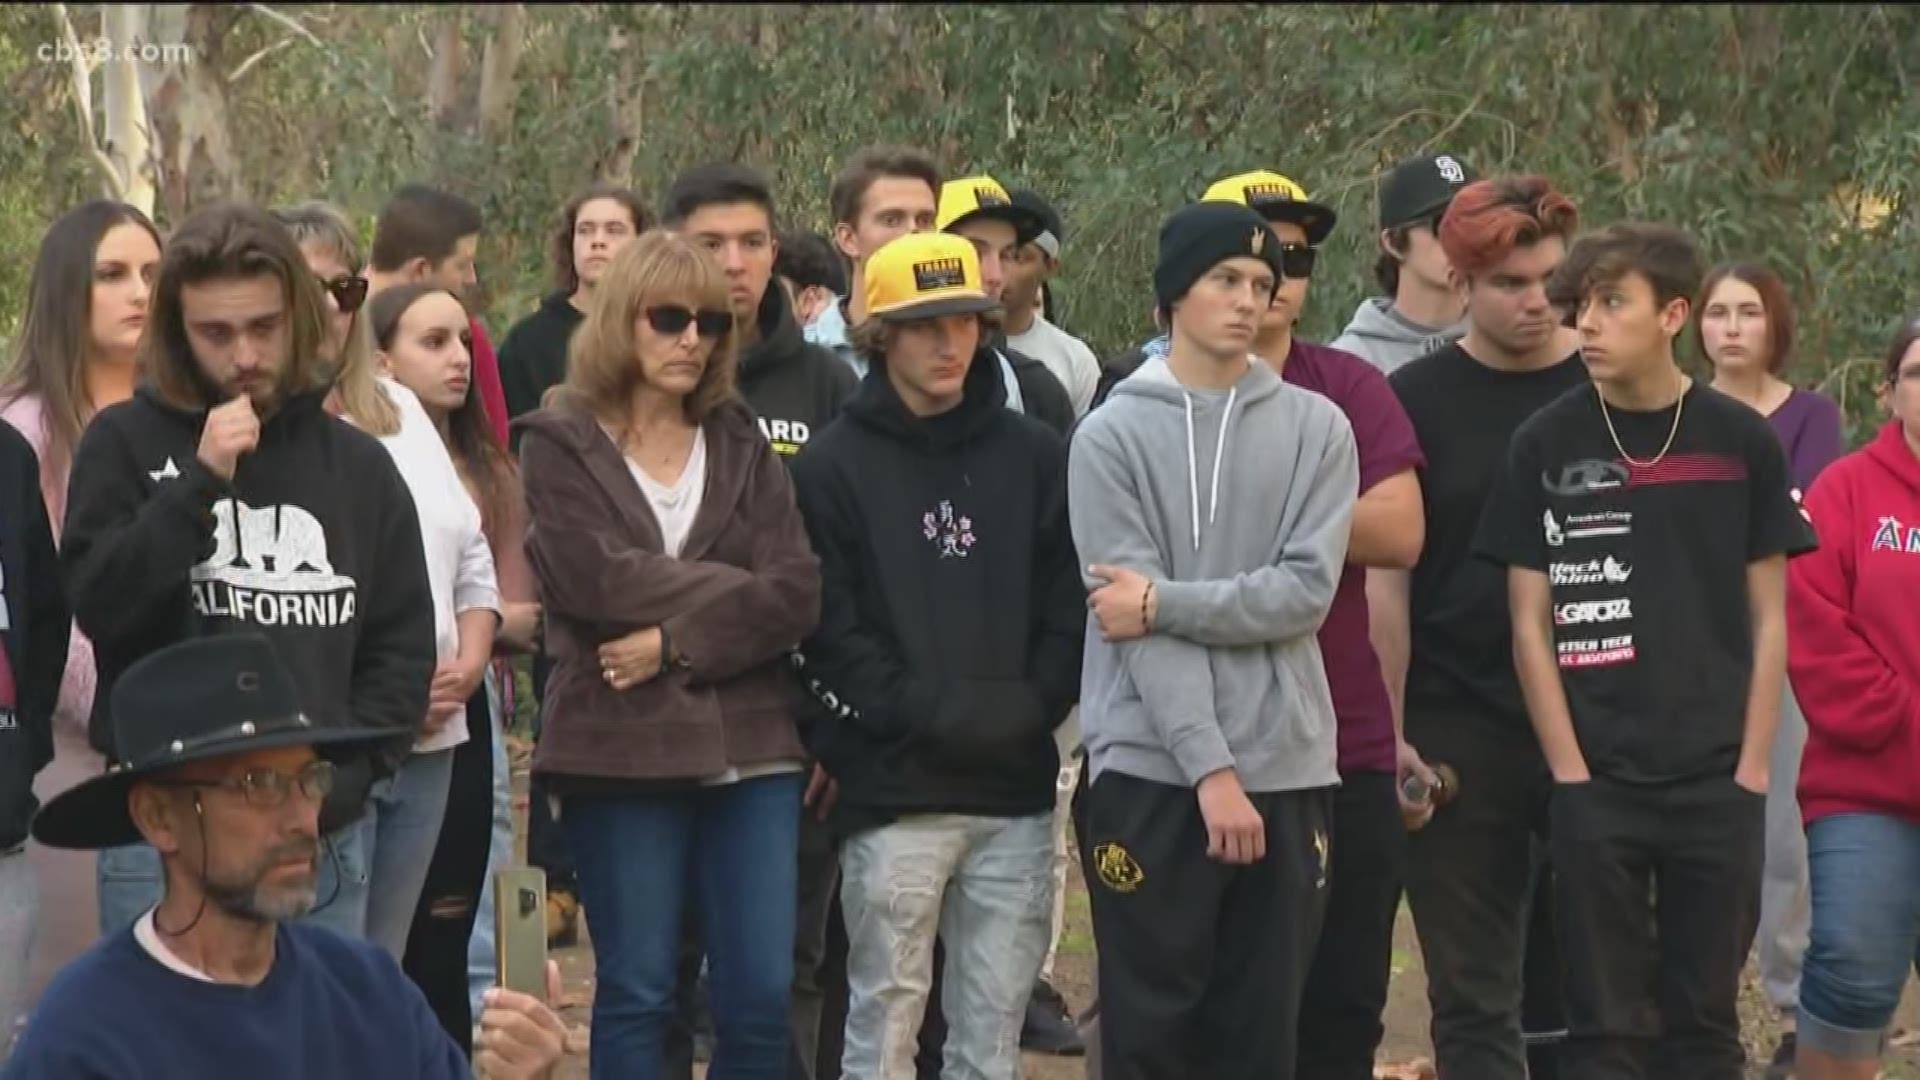 The community honored the two 16-year-old boys that died in a crash in Lakeside last Saturday night.